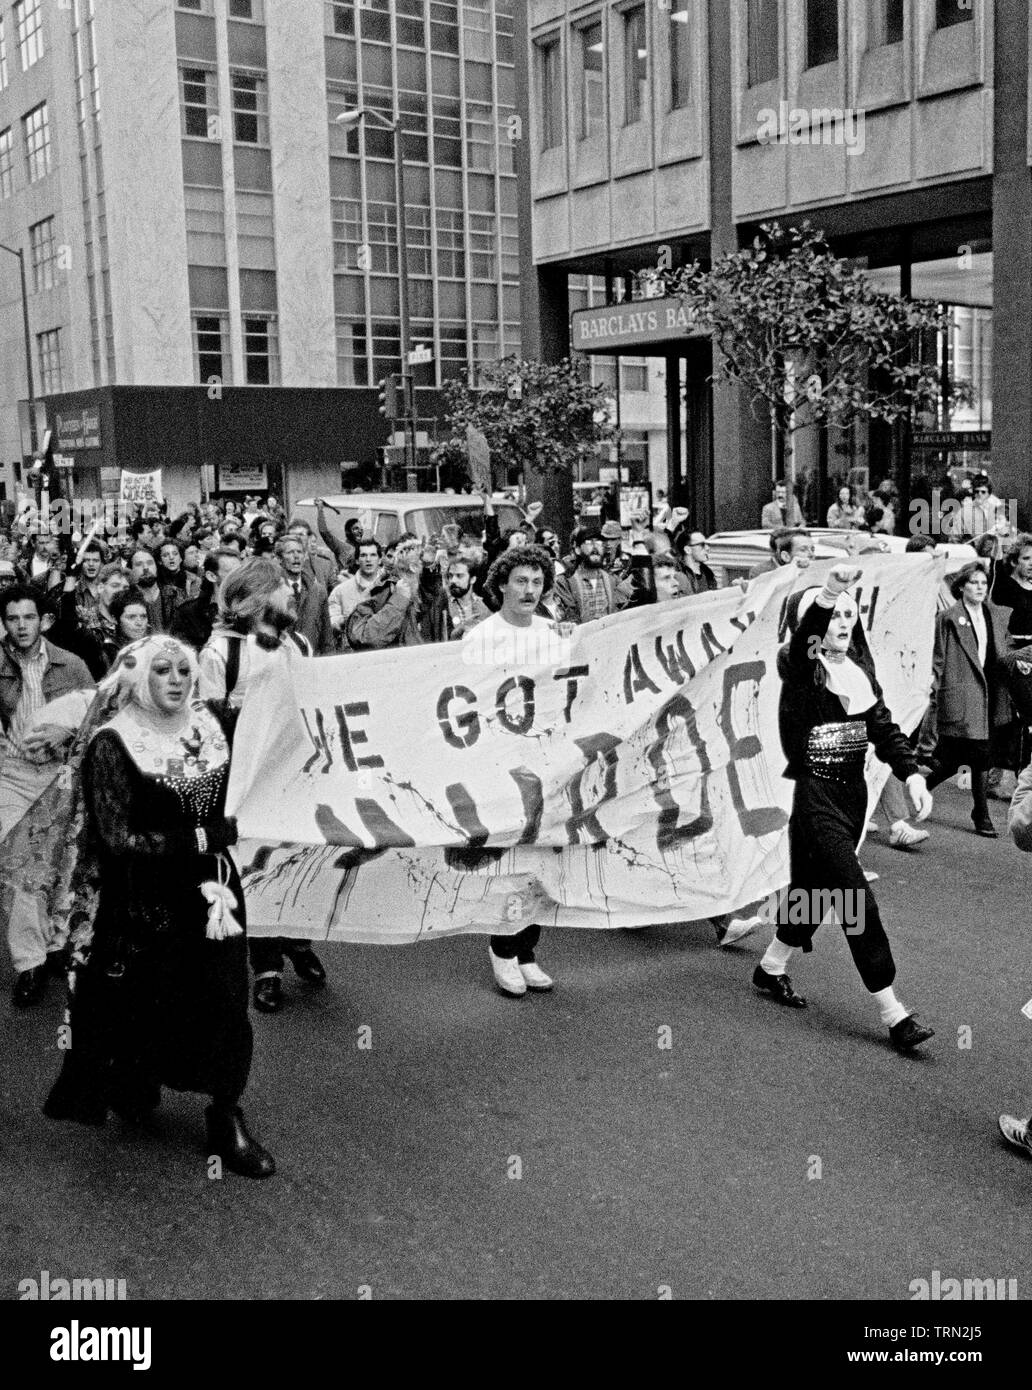 protesters of the Dan White sentence in the assassination of Mayor George Moscone and gay supervisor, Harvey Milk, march and carry 'He got away with murder' banner, in San Francisco, 1970s Stock Photo